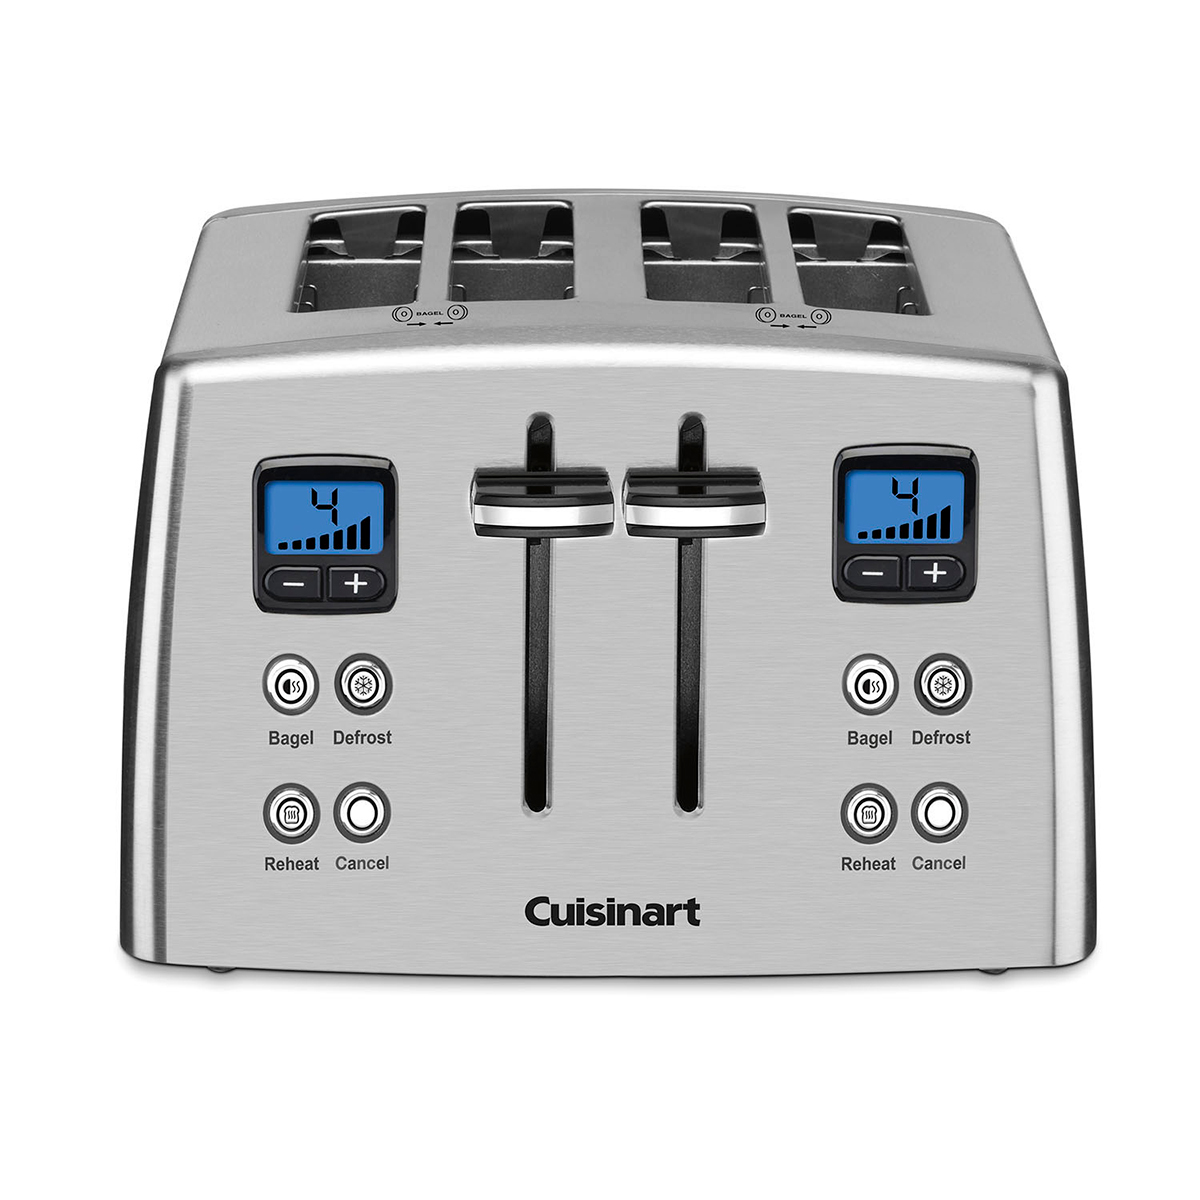 Cuisinart(R) Stainless Steel 4 Slice Countdown Toaster